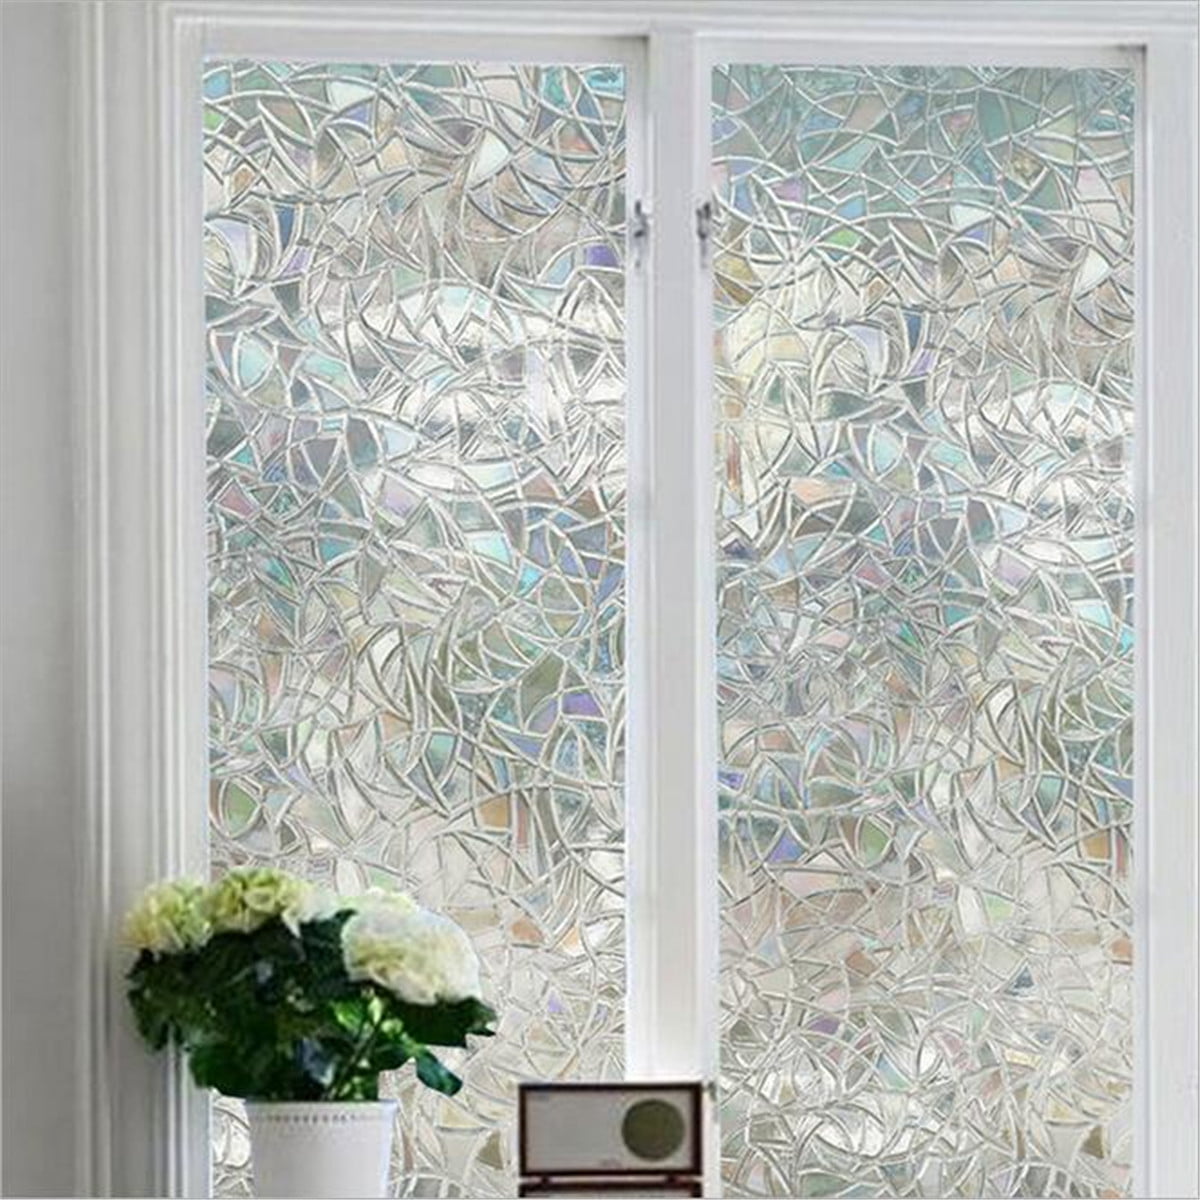 3D Static Cling ,Frosted ,Anti-UV ,Removable Window ...
